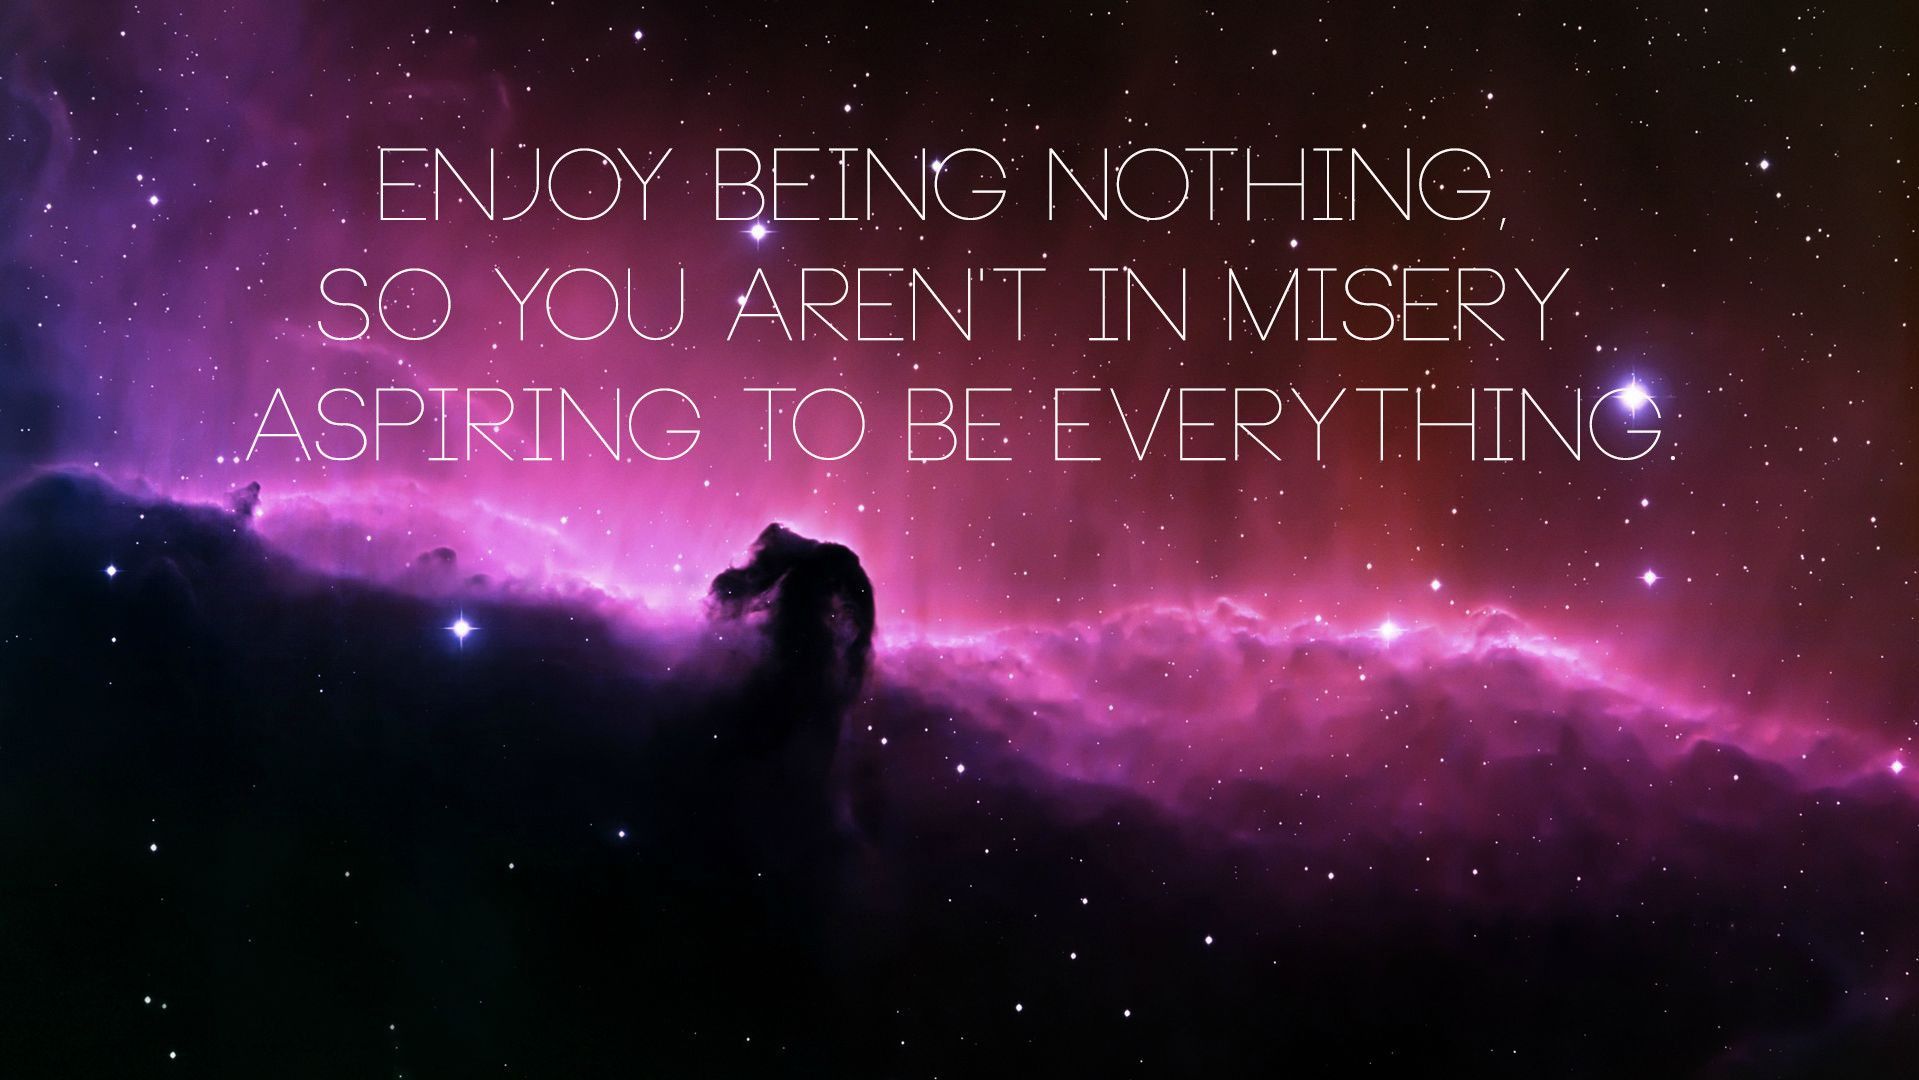 Enjoy being nothing so you aren't in misery aspiring to be